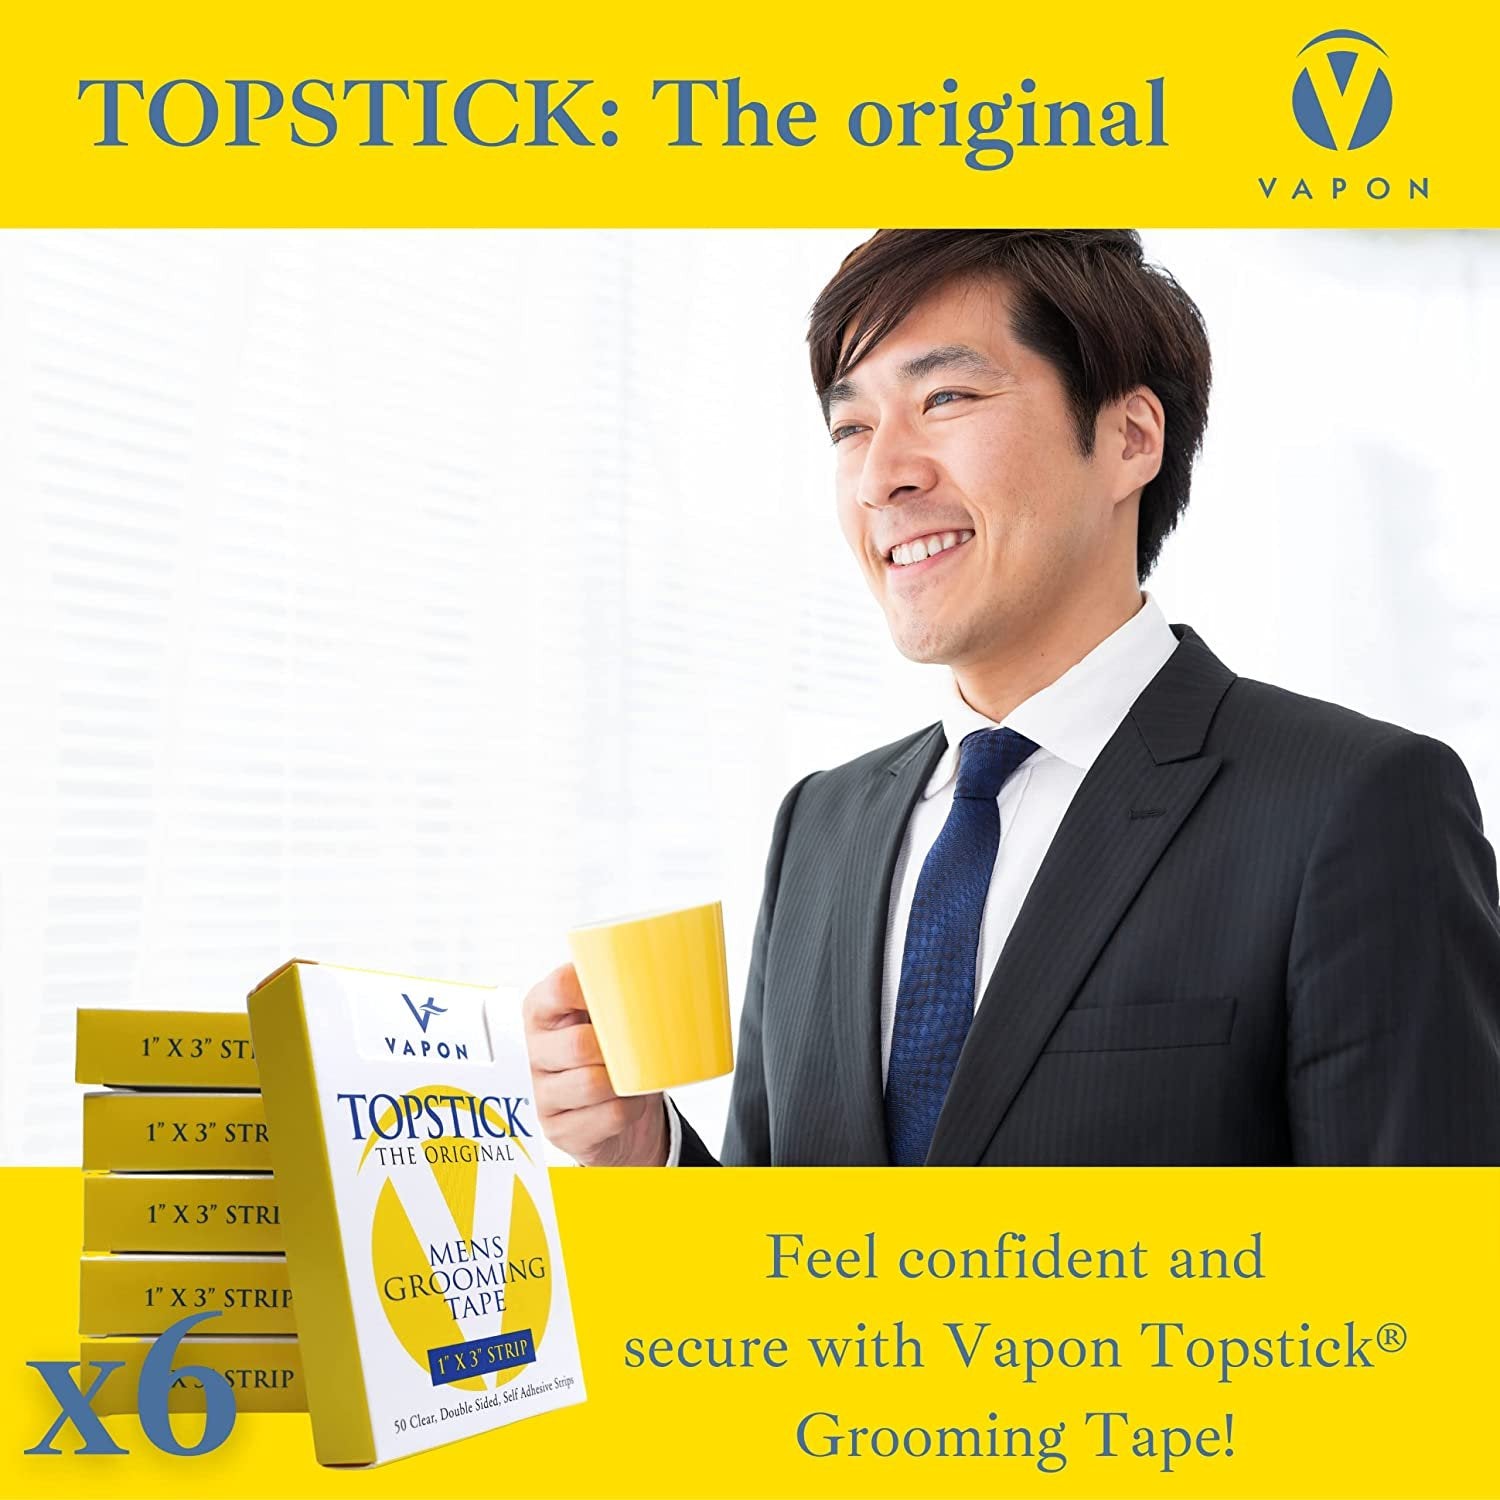 Vapon Topstick - The Original Men's Grooming Tape - 300 Count 6 Boxes - 1" x 3" Double Sided, Self Adhesive, Clear Tape for Toupee and Wig Adhesion - Hypo Allergenic, Waterproof, and Latex Free